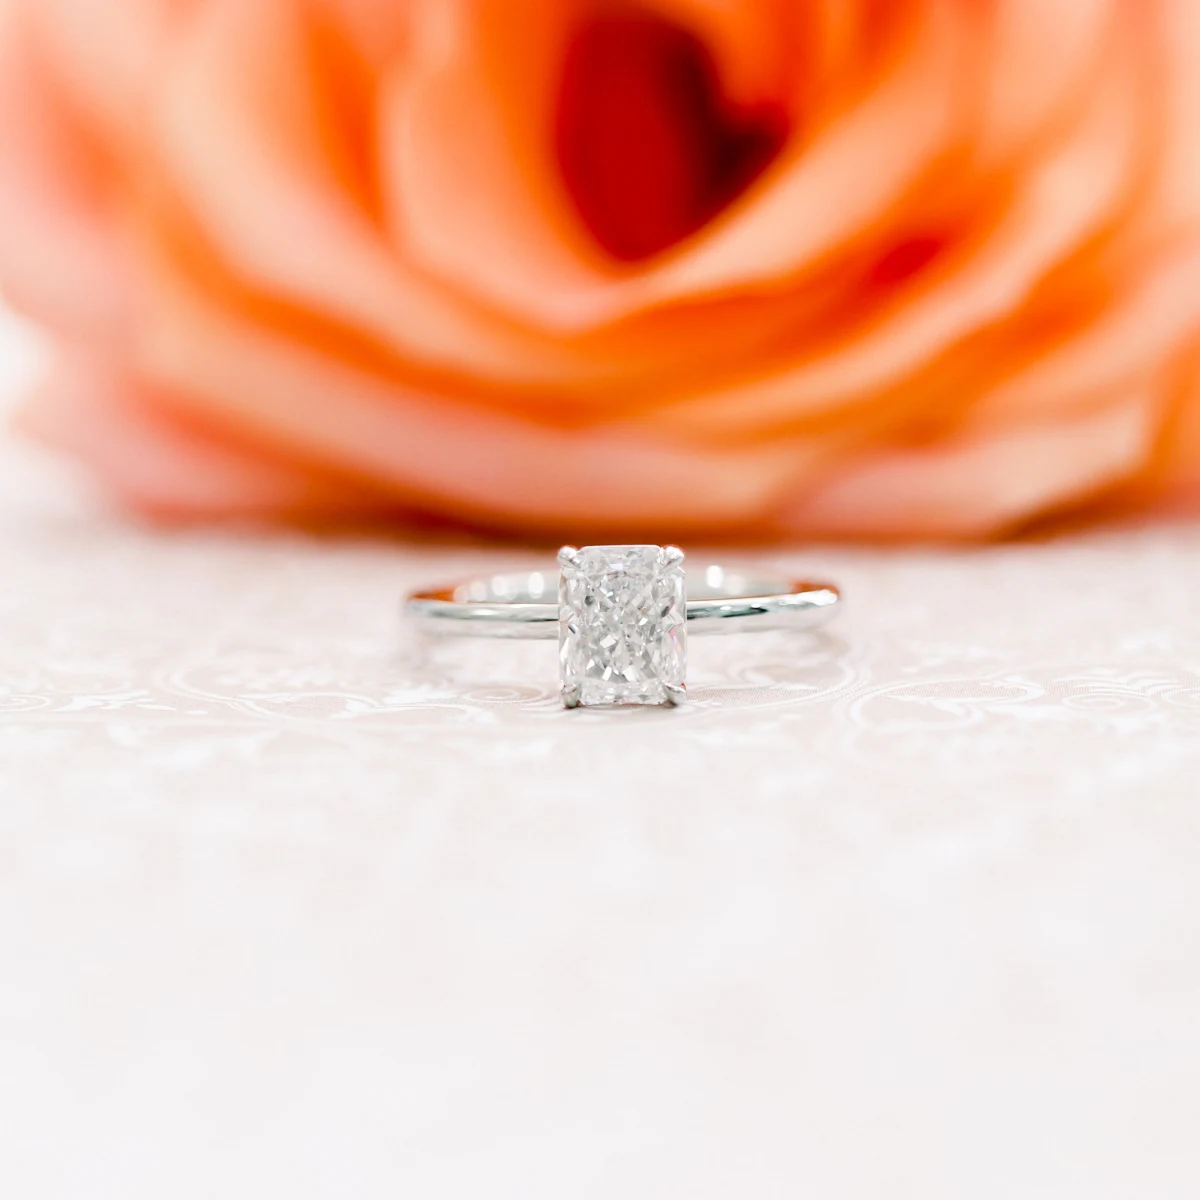 Radiant Petite Four Prong Solitaire Diamond Engagement Ring